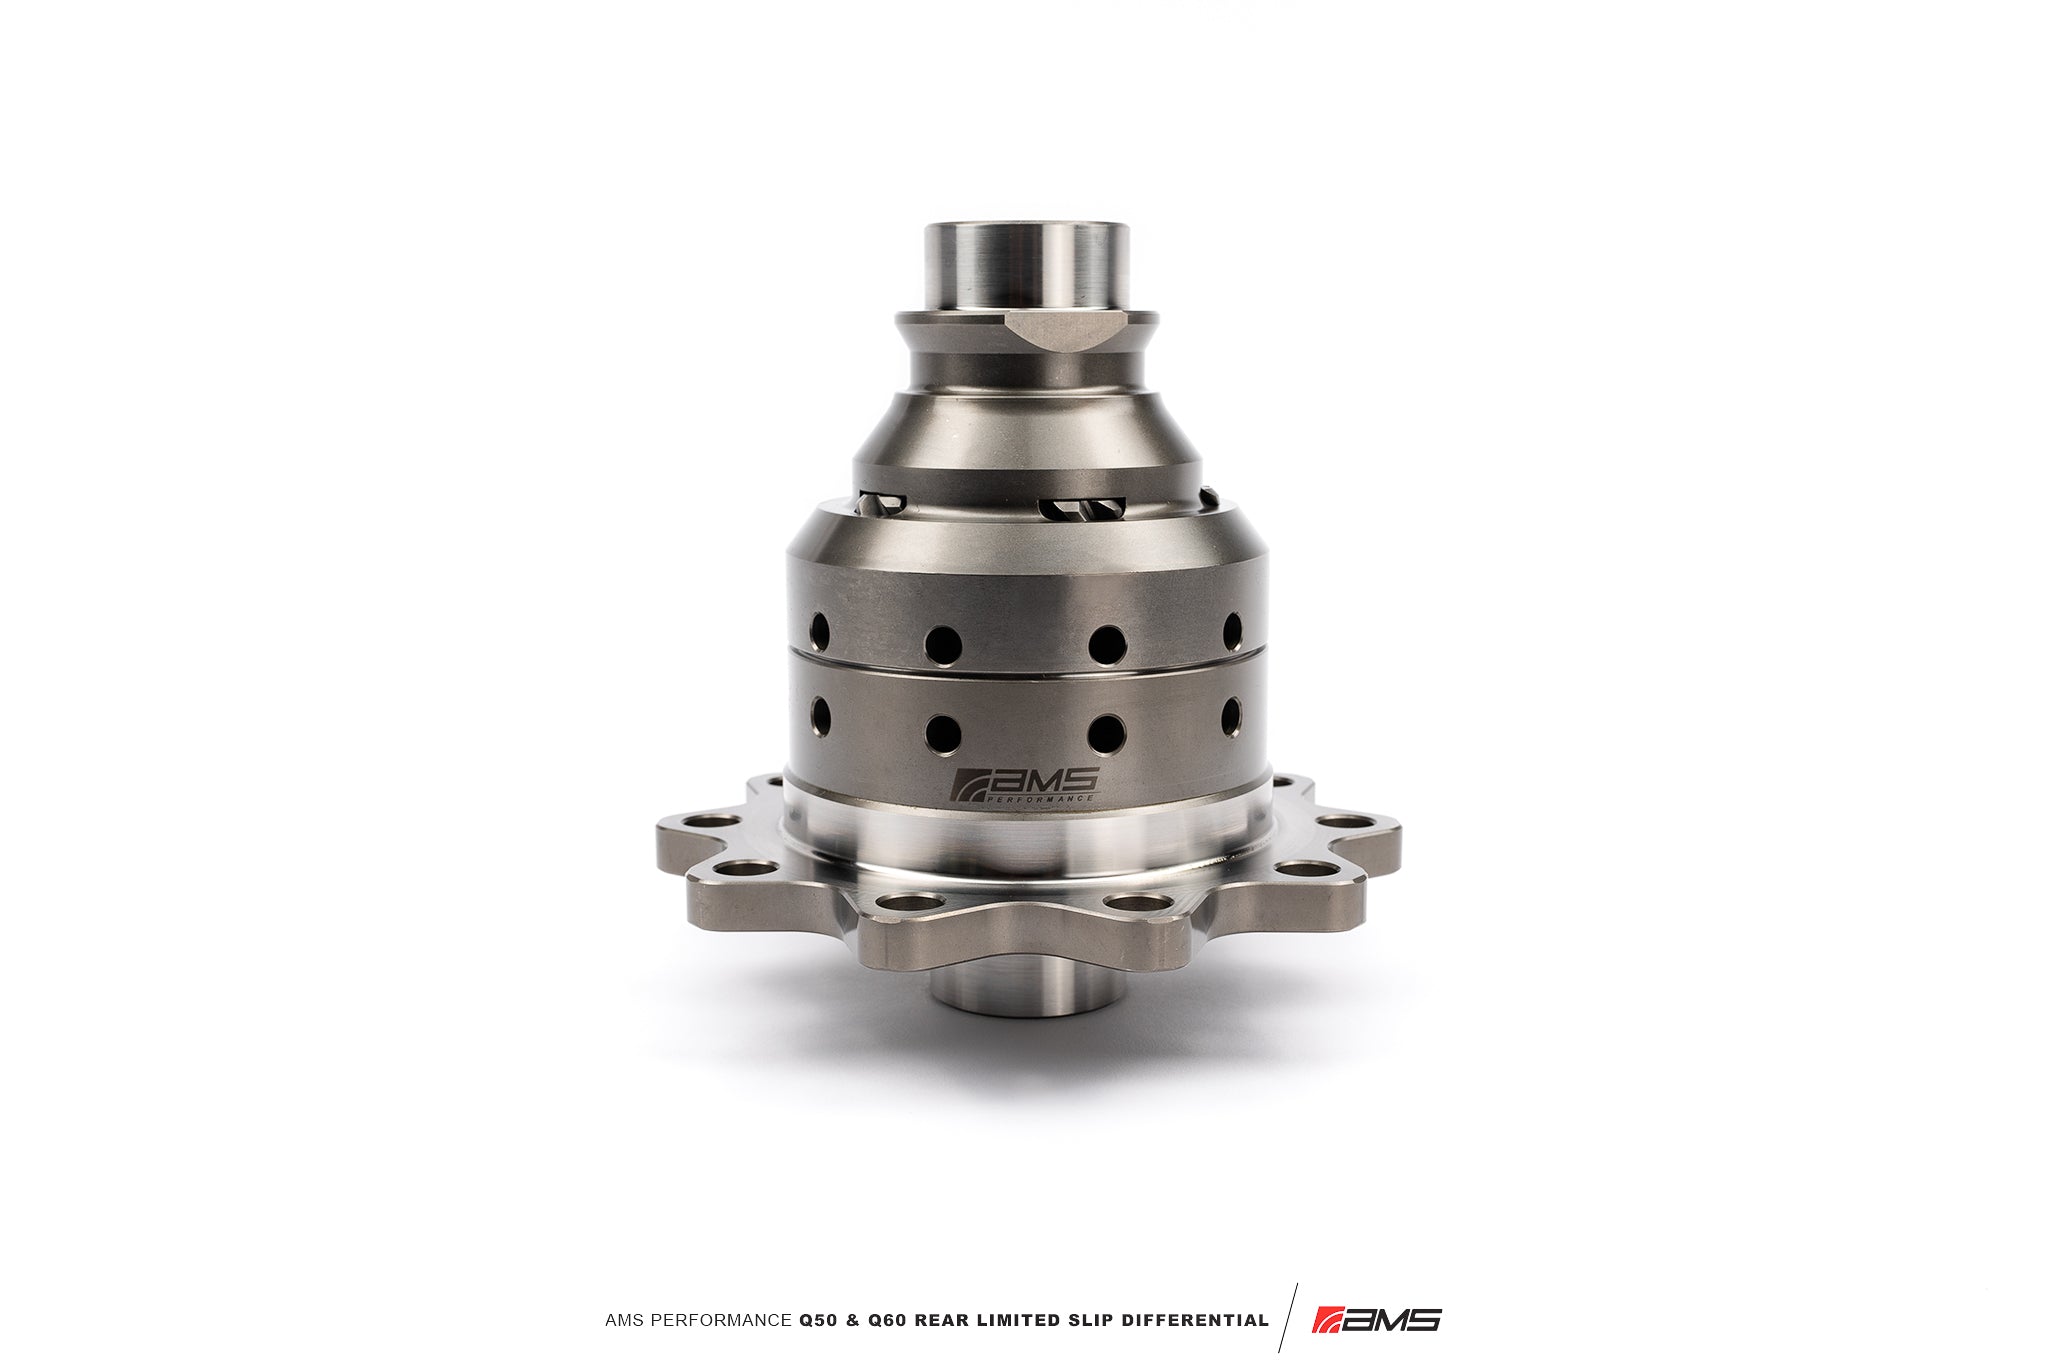 AMS PERFORMANCE Q50 & Q60 REAR LIMITED SLIP DIFFERENTIAL